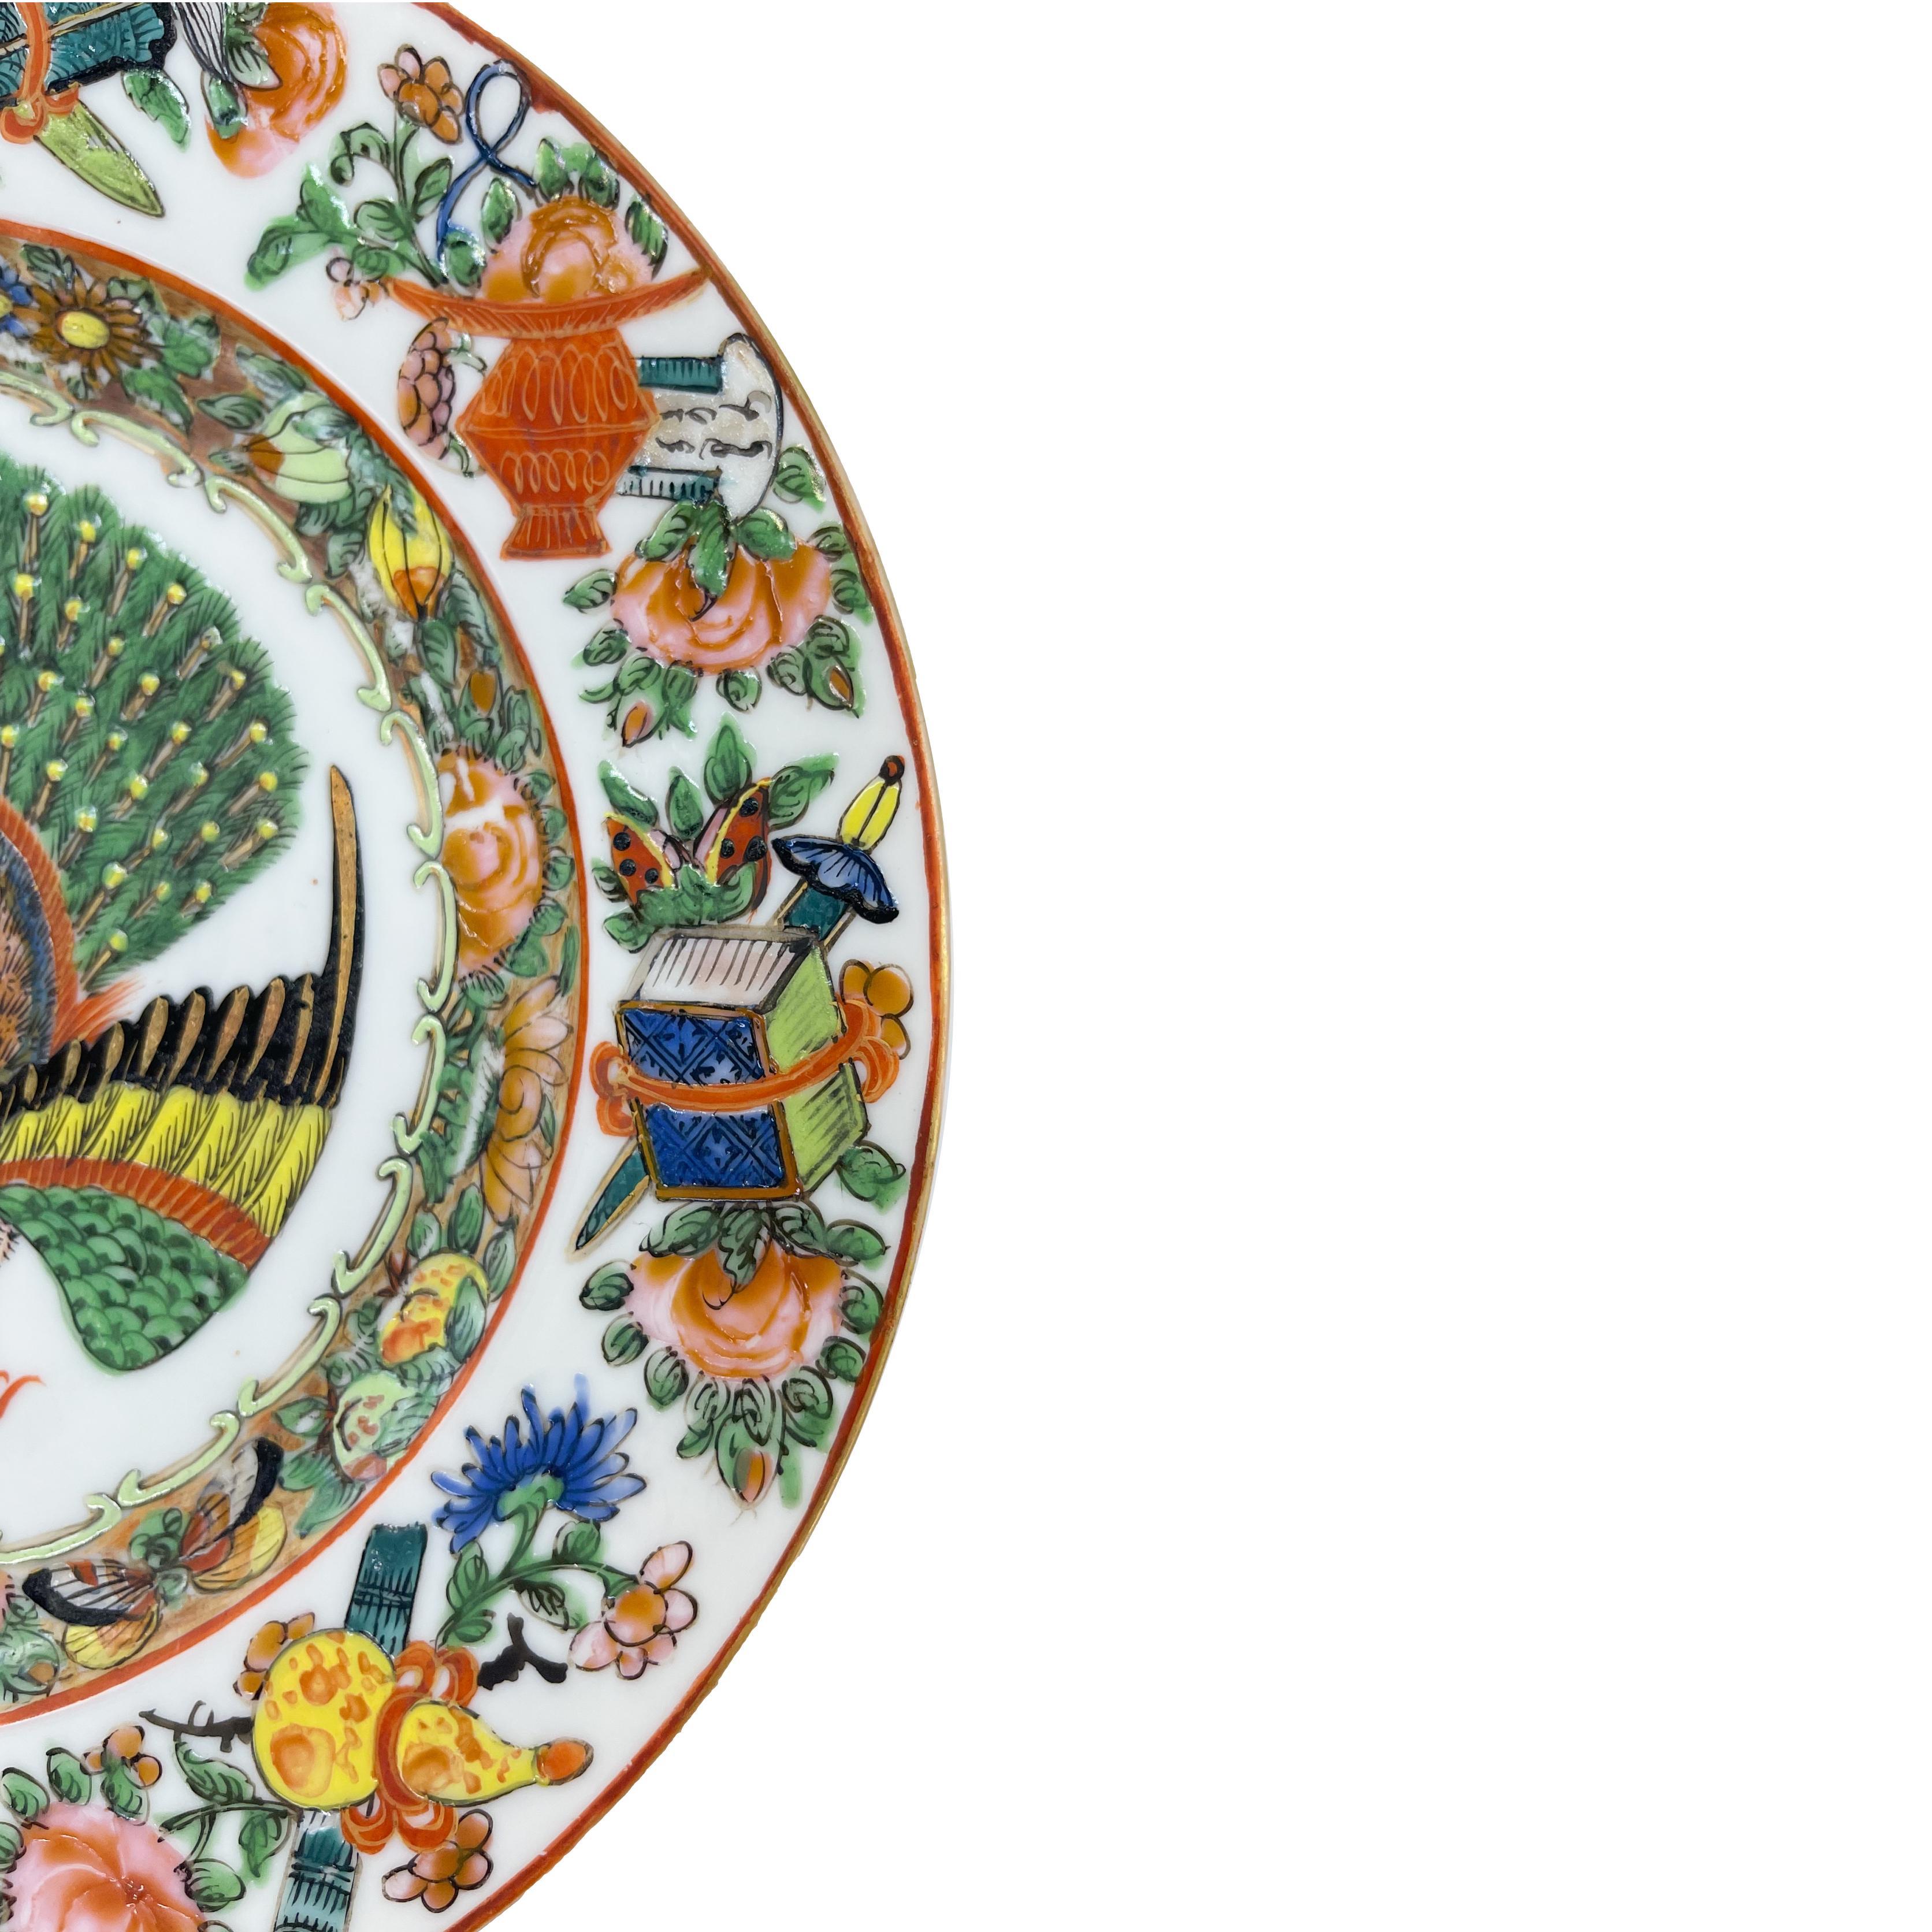 Enamel Chinese Export Canton Famille Rose Plate with Rare Central Peacock, ca. 1865 For Sale